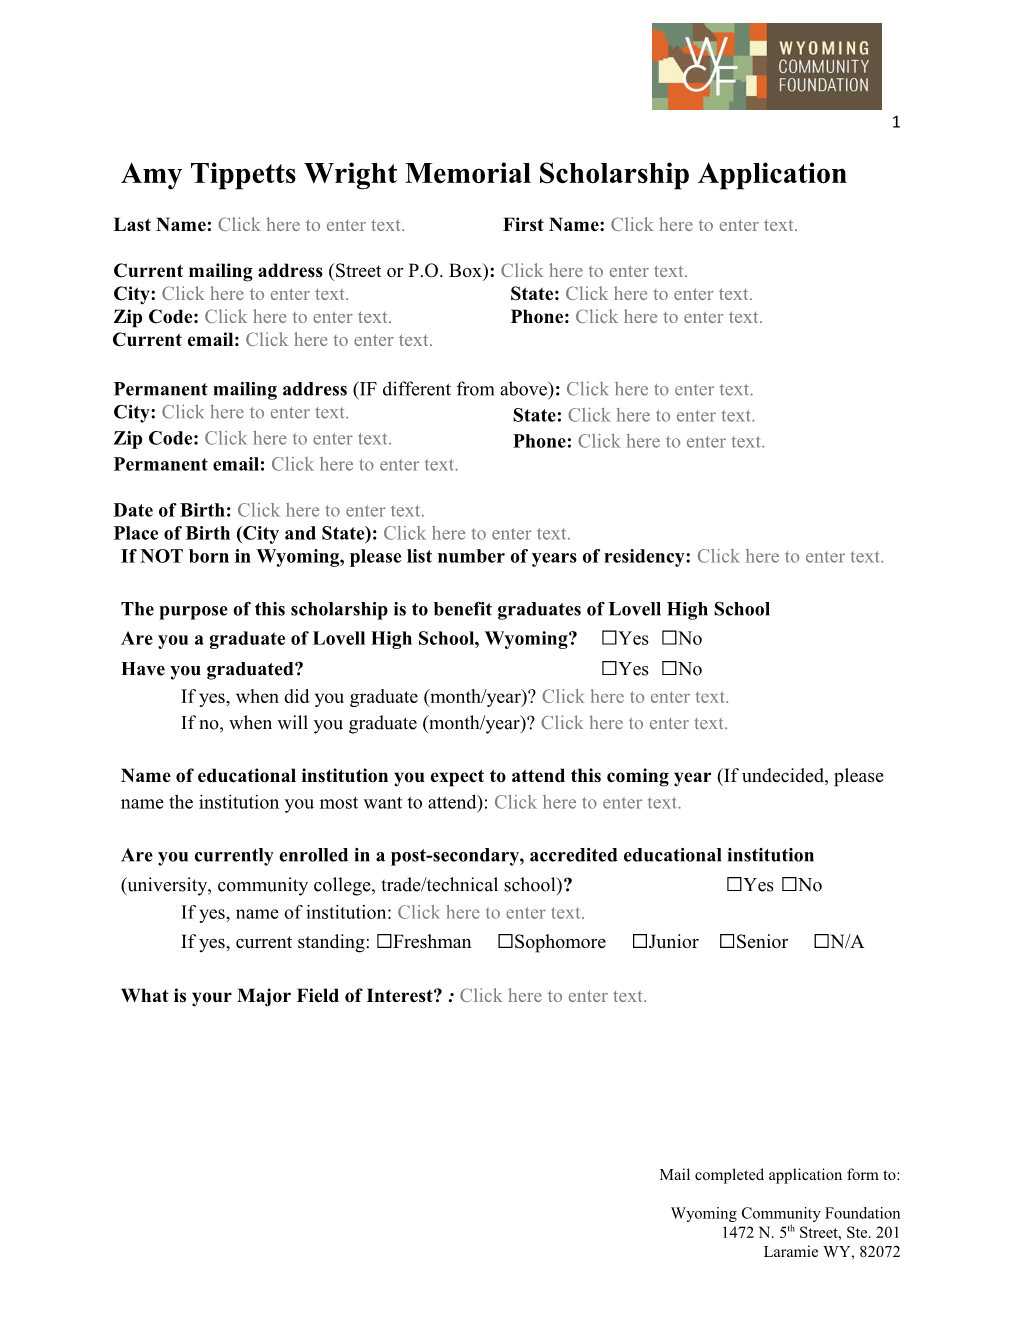 Amy Tippetts Wright Memorial Scholarship Application